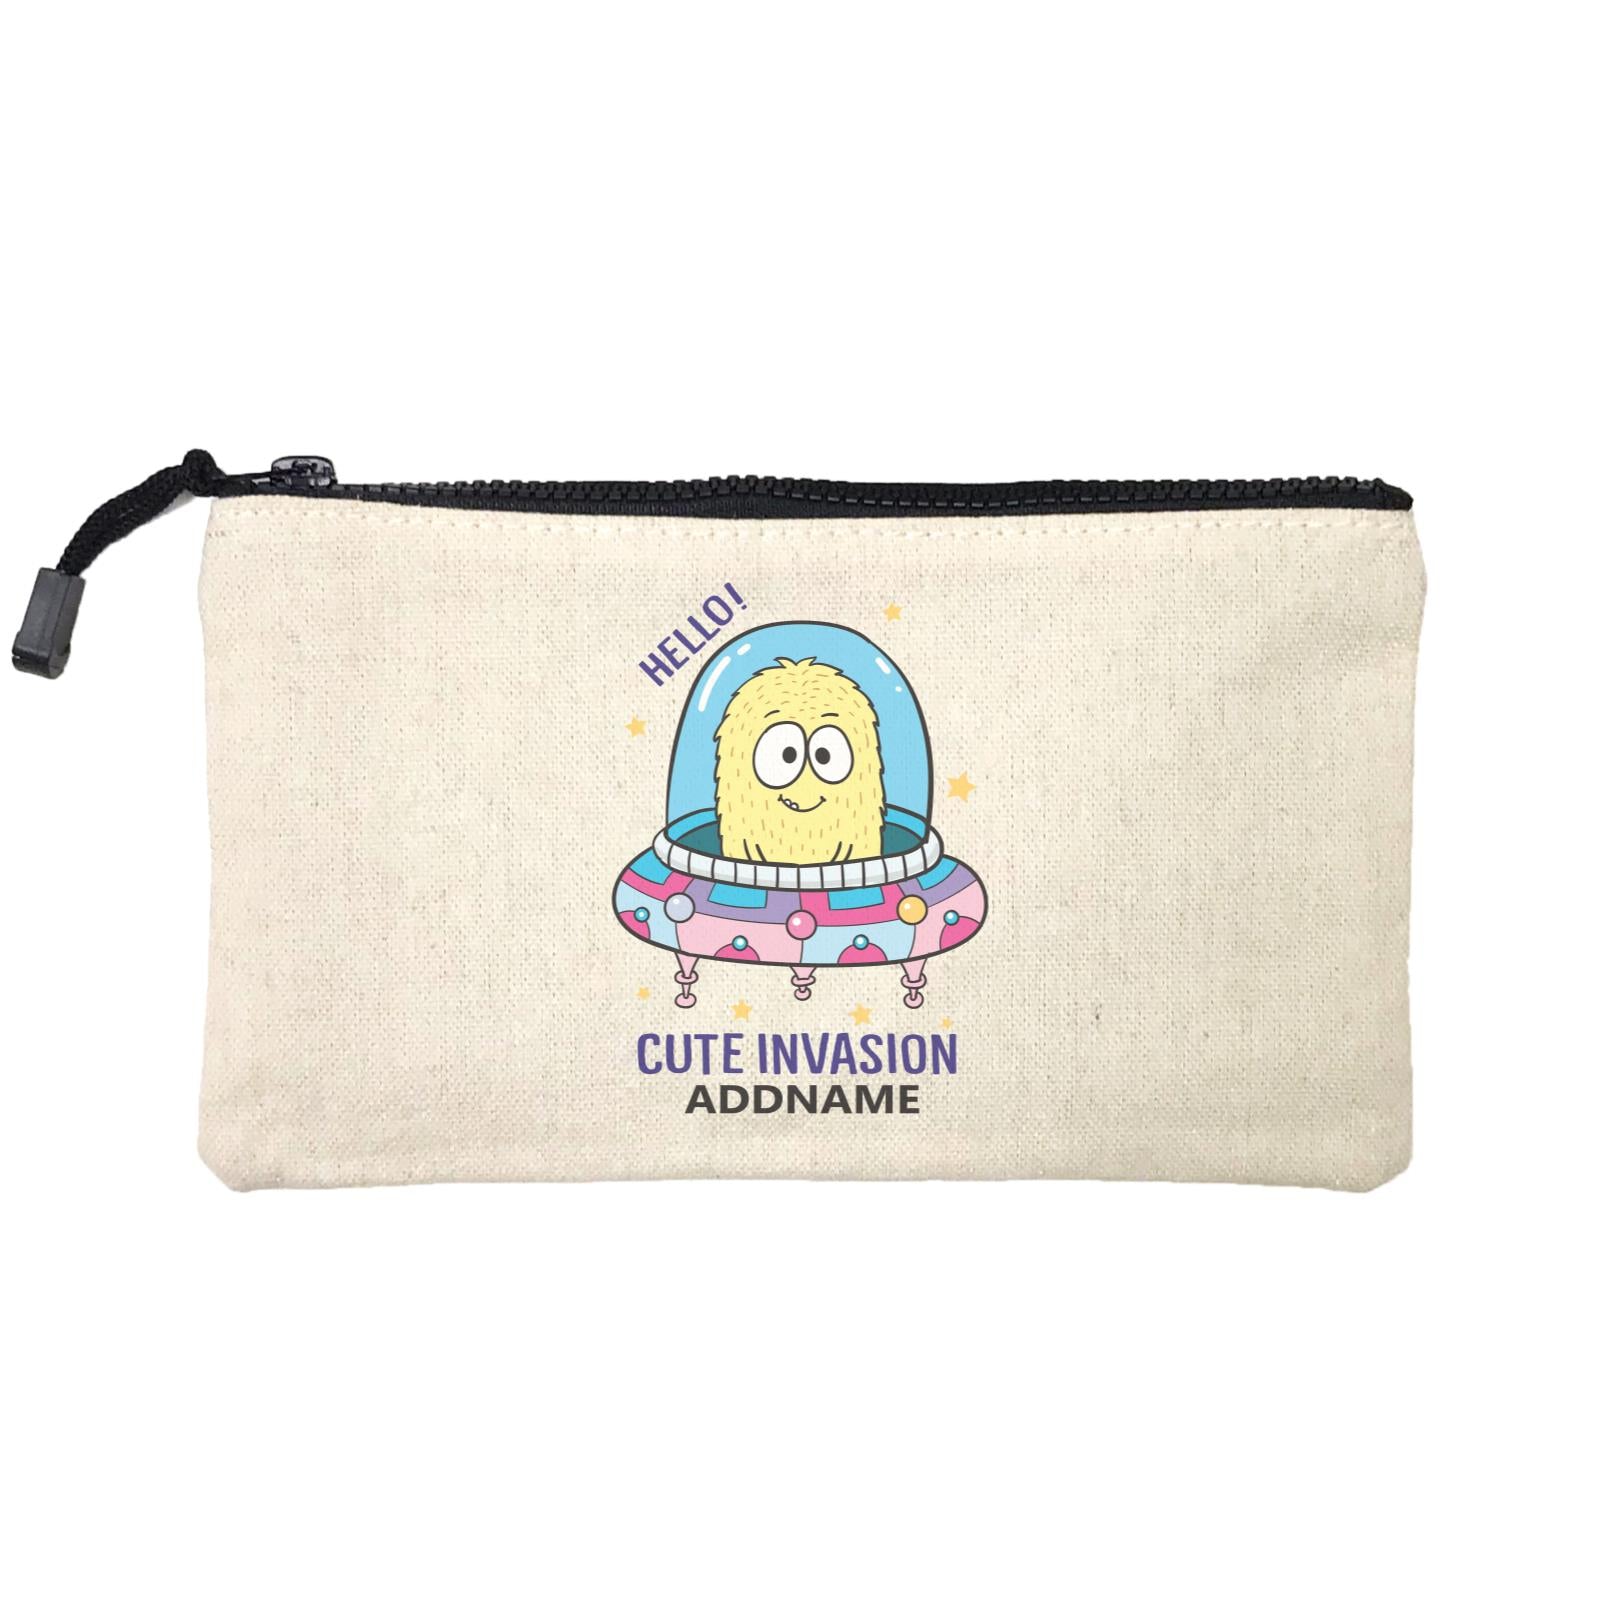 Cool Cute Monster Hello Cute Invasion Monster Addname Mini Accessories Stationery Pouch